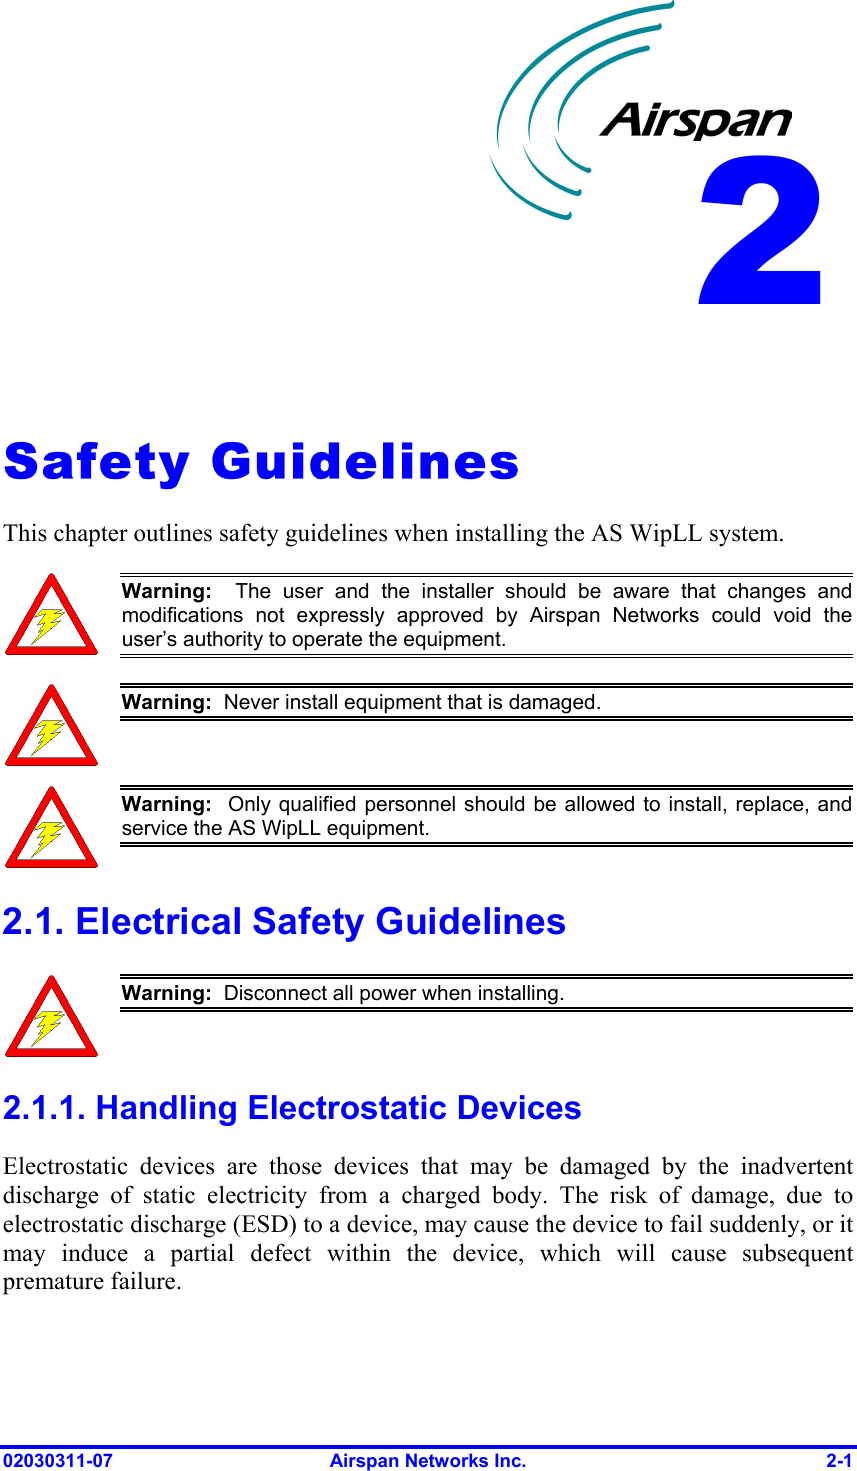  02030311-07  Airspan Networks Inc.  2-1   Safety Guidelines This chapter outlines safety guidelines when installing the AS WipLL system.  Warning:  The user and the installer should be aware that changes andmodifications not expressly approved by Airspan Networks could void theuser’s authority to operate the equipment.  Warning:  Never install equipment that is damaged.  Warning:  Only qualified personnel should be allowed to install, replace, andservice the AS WipLL equipment. 2.1. Electrical Safety Guidelines  Warning:  Disconnect all power when installing. 2.1.1. Handling Electrostatic Devices Electrostatic devices are those devices that may be damaged by the inadvertent discharge of static electricity from a charged body. The risk of damage, due to electrostatic discharge (ESD) to a device, may cause the device to fail suddenly, or it may induce a partial defect within the device, which will cause subsequent premature failure. 2 